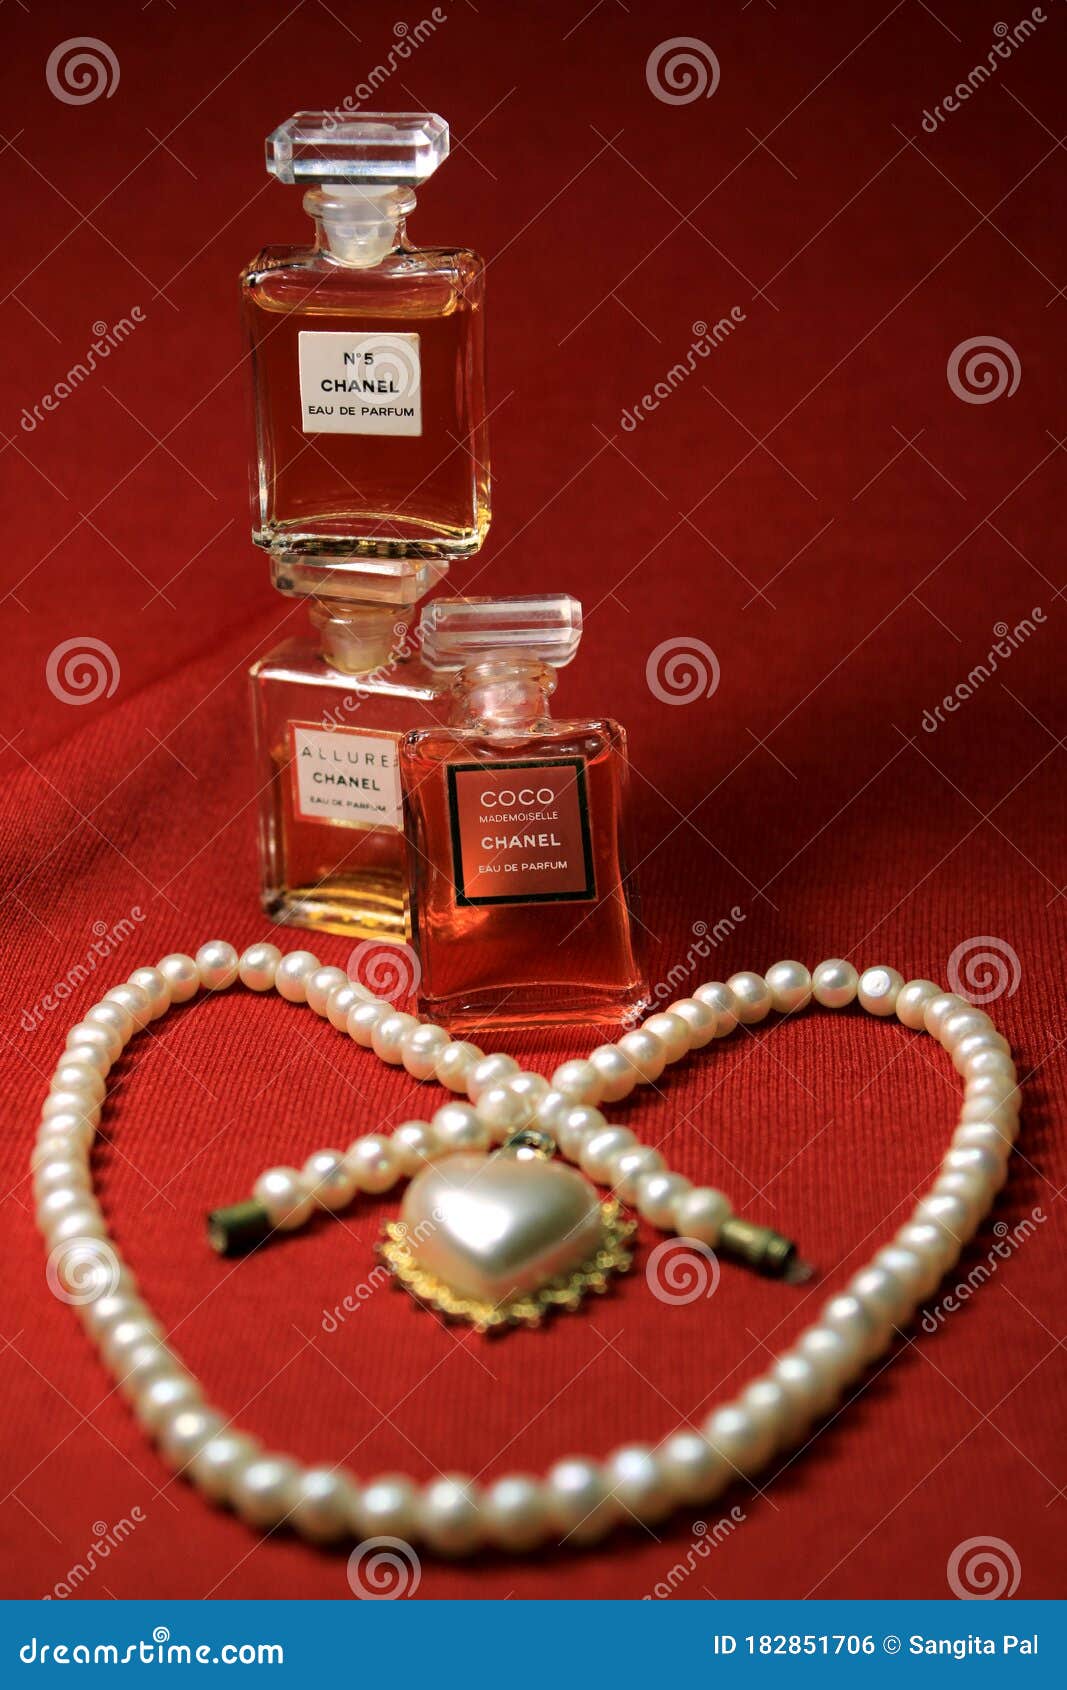 Chanel Perfume Bottles Isolated on Red Background. Bottles with Different Chanel  Perfume Products with Female Accessories. Editorial Photo - Image of aroma,  body: 182851706